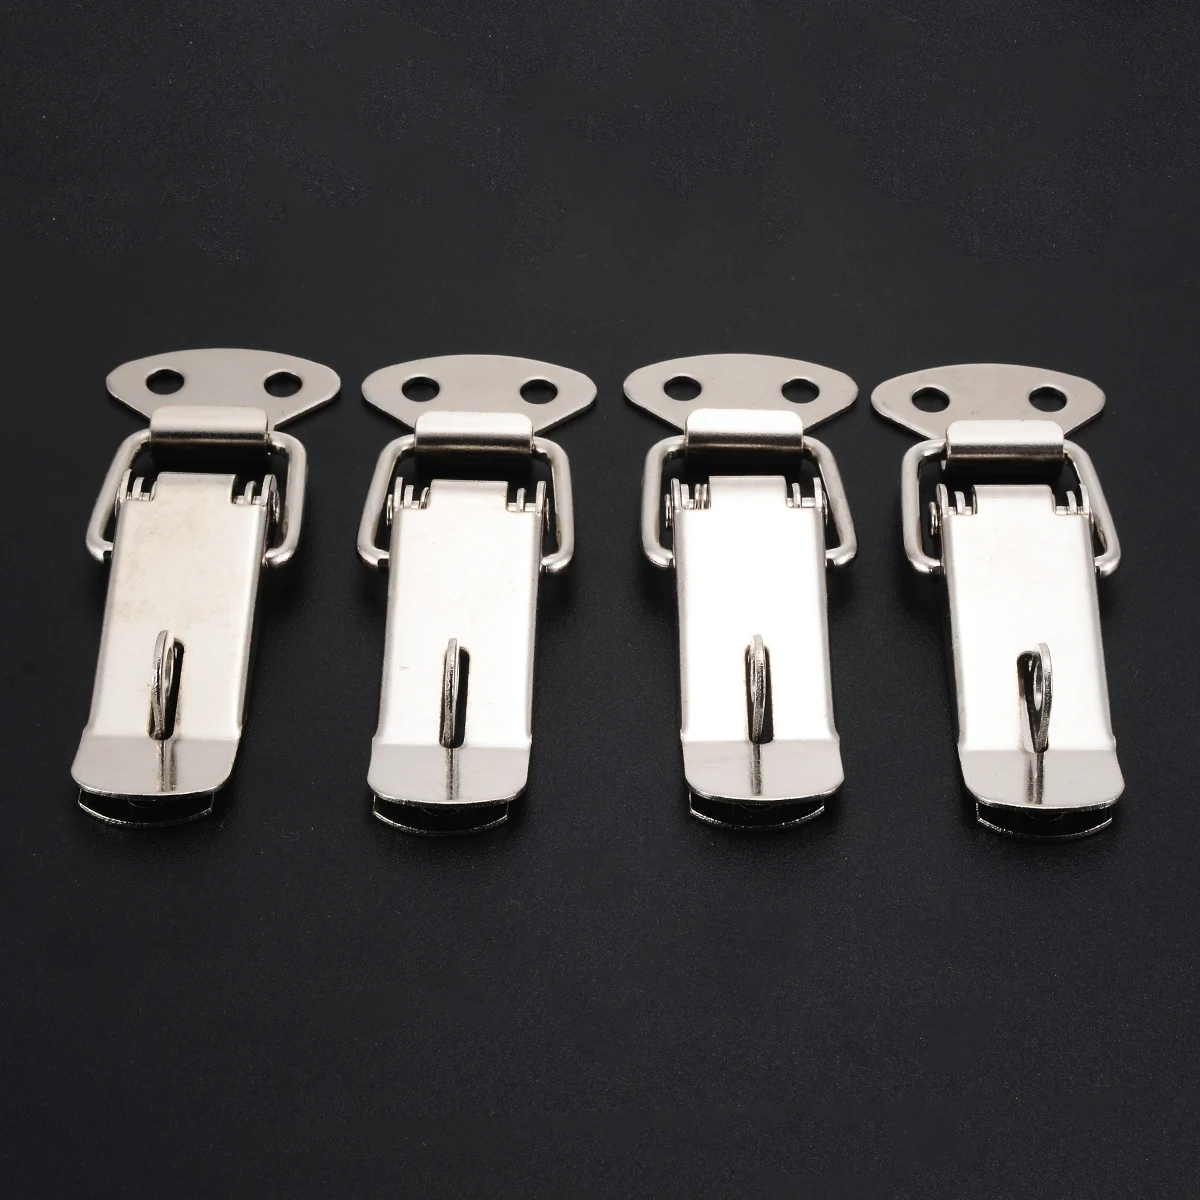 4Pcs Stainless Steel Spring Toggle Latch Catch For Case Chest Lock Box Lock Hardware Tools Mayitr